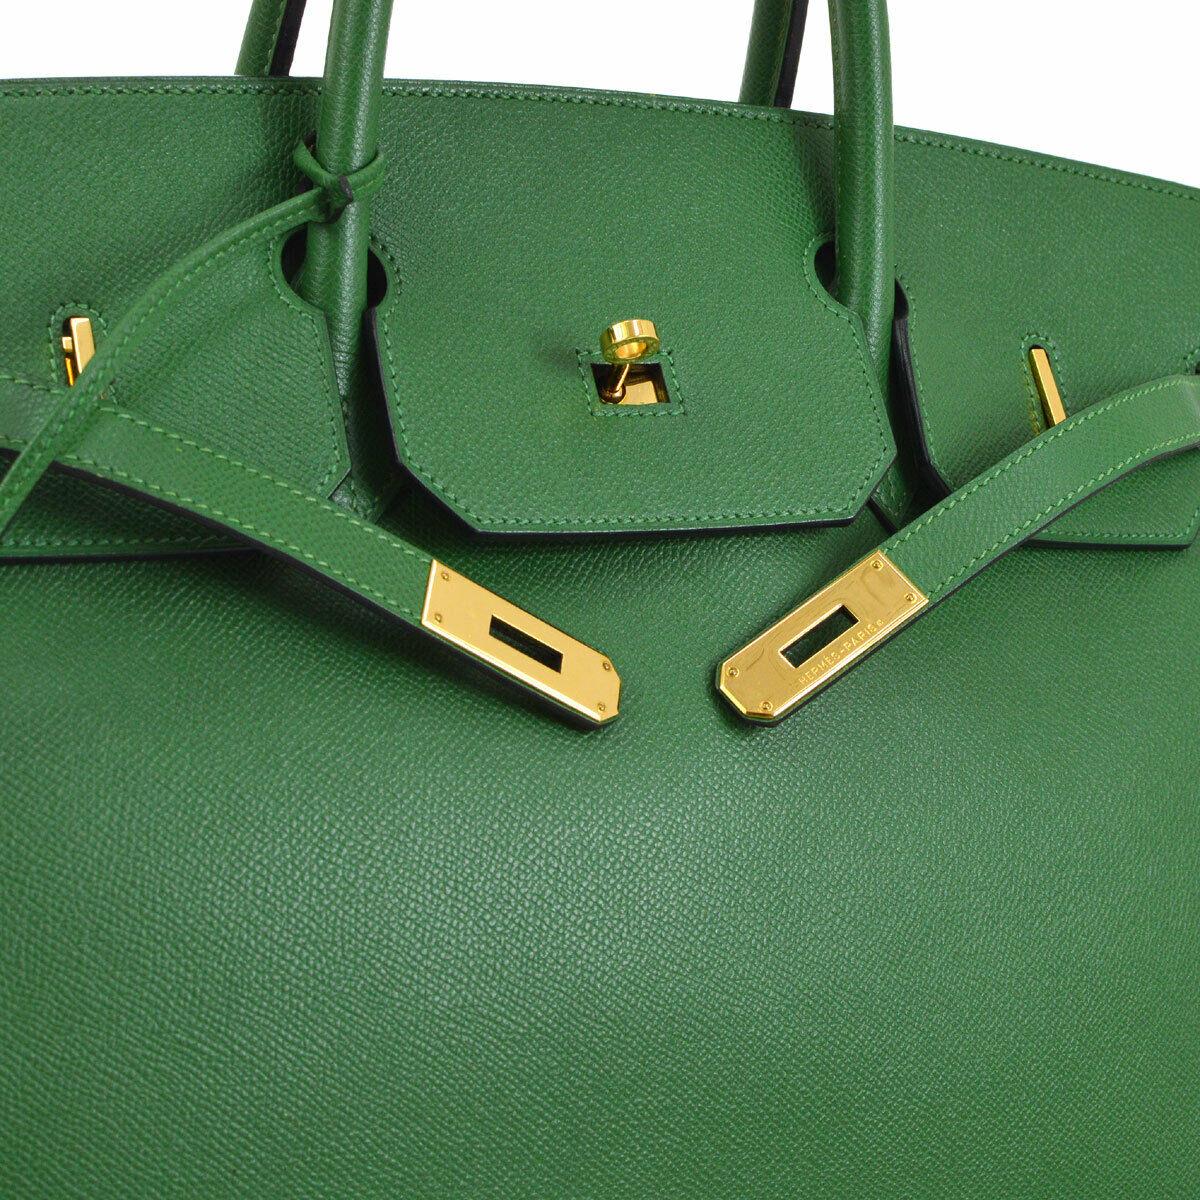 Hermes Birkin 40 Green Leather Gold Carryall Travel Top Handle Satchel Tote Bag

Leather
Gold tone hardware
Leather lining
Date code present
Made in France
Handle drop 4.25